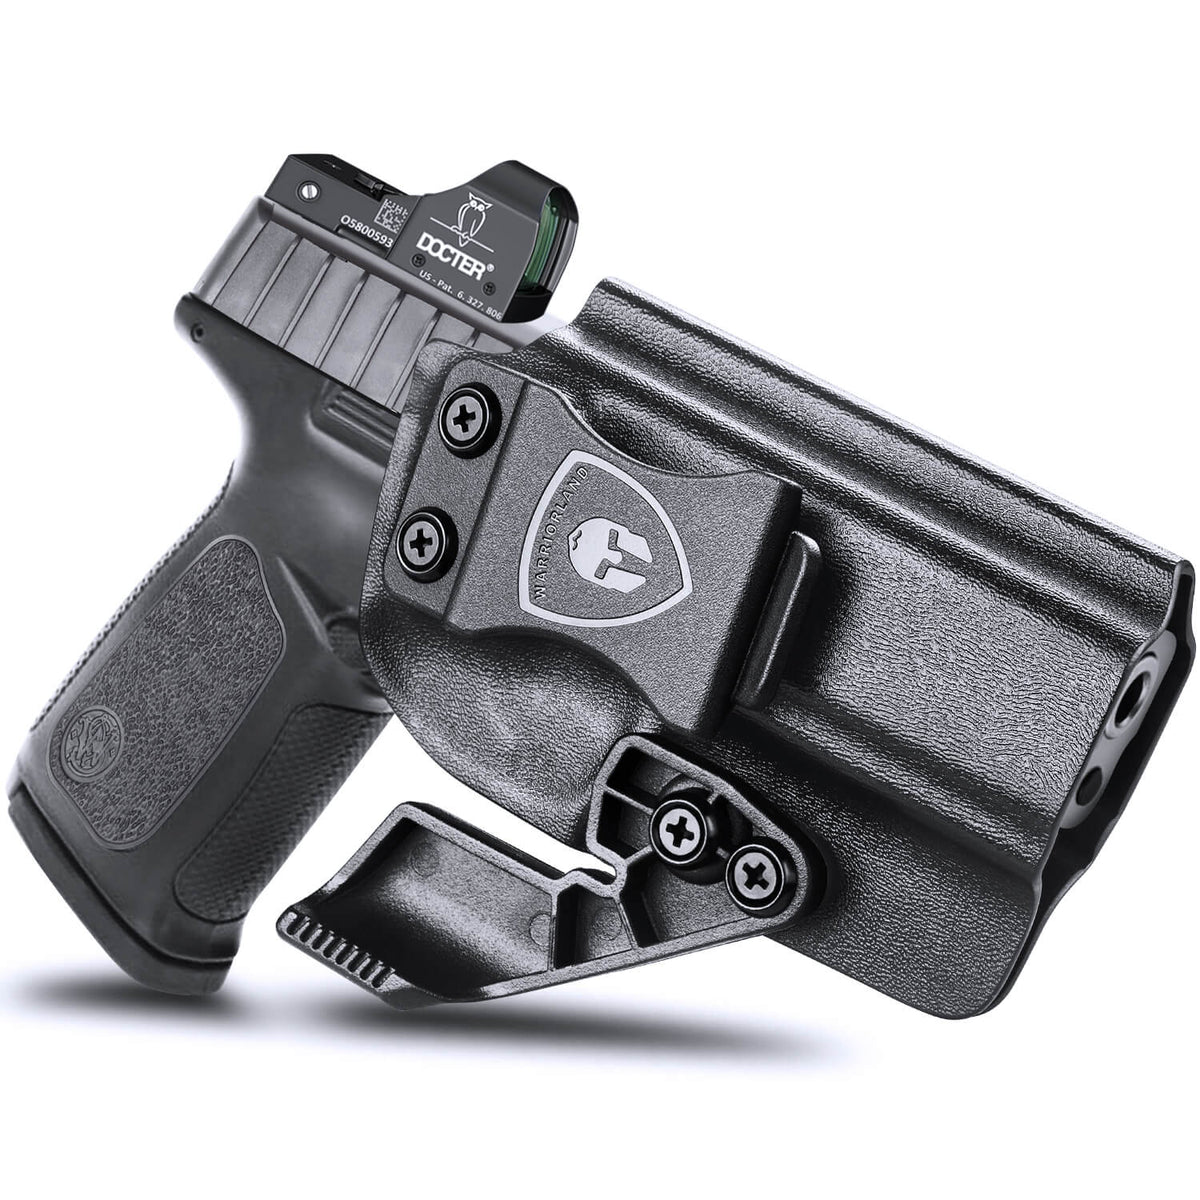 Smith & Wesson SD9 SD40 VE Inside Waistband Concealed Carry Holster with Claw Holsters for Fat Guys | WARRIORLAND